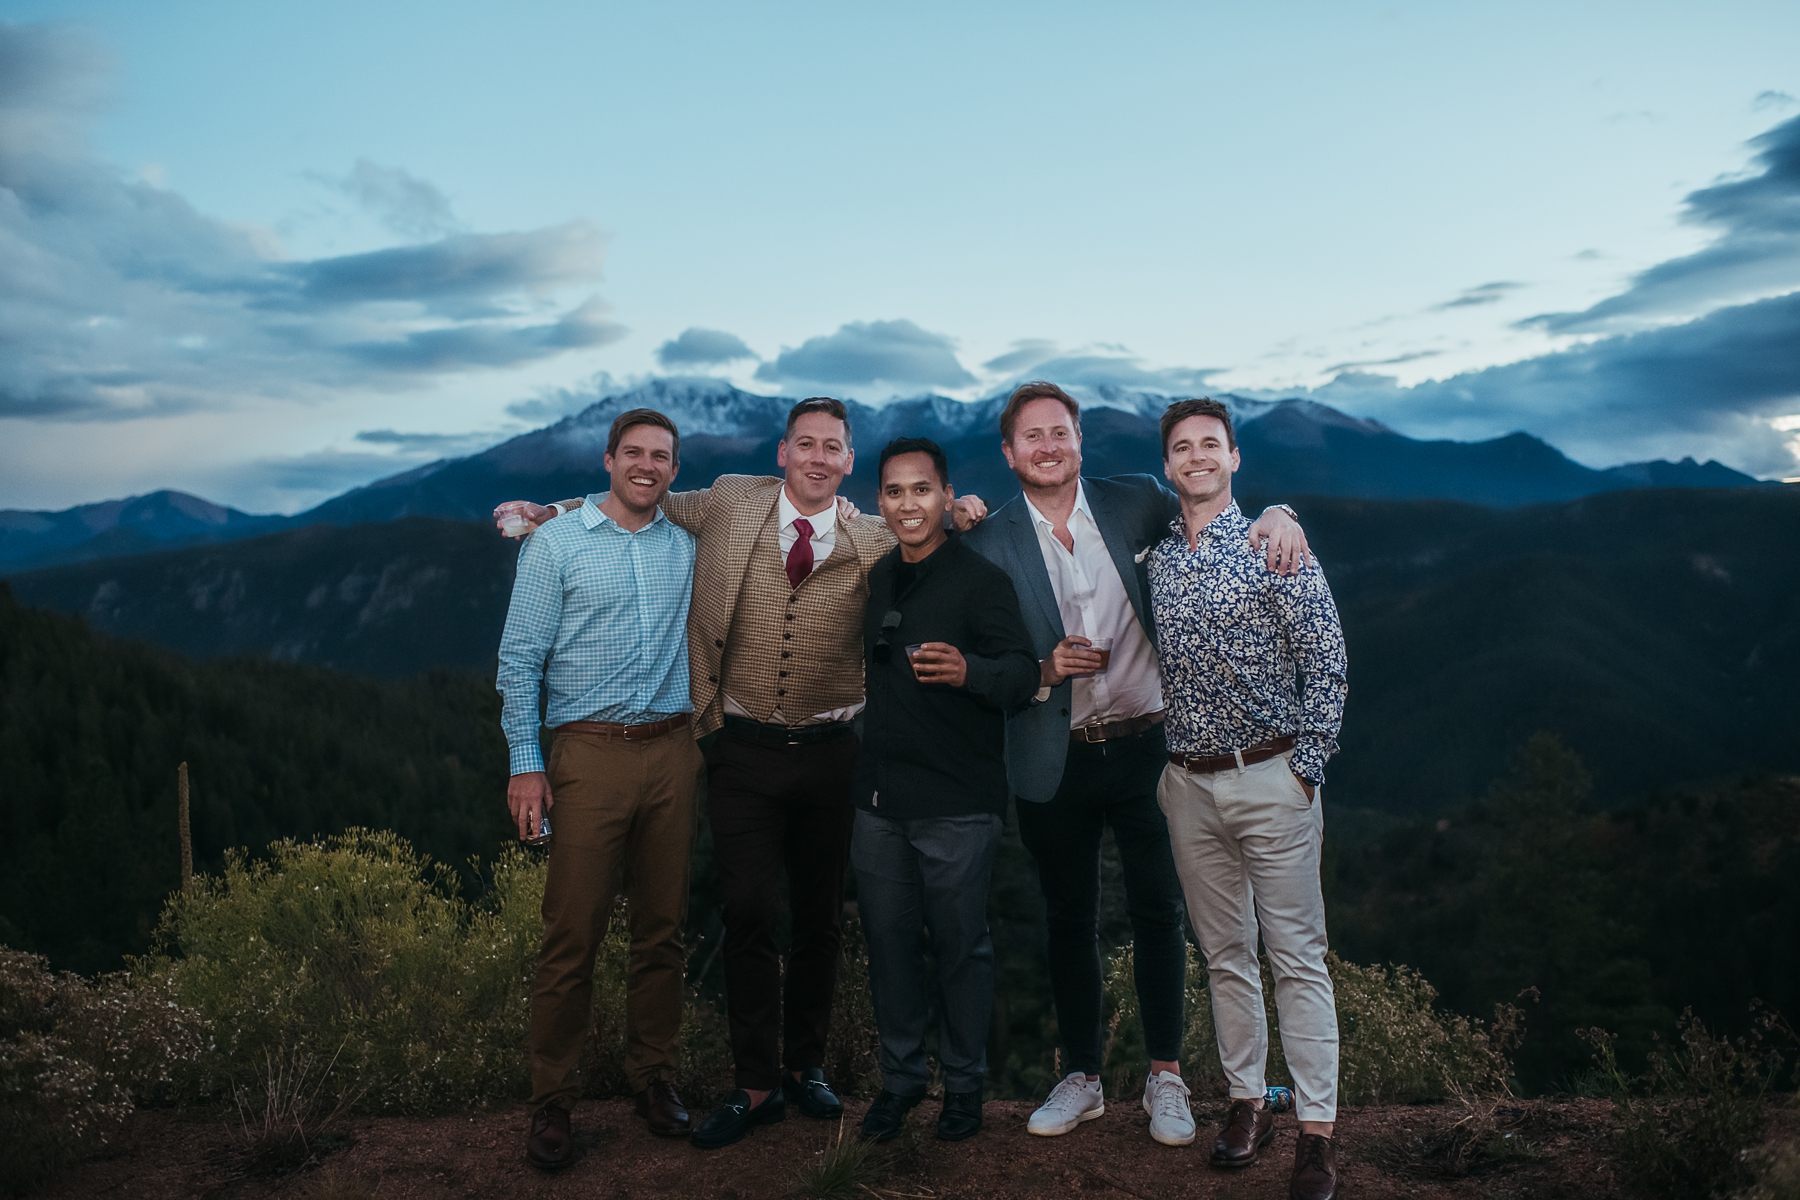 Groom with friends in front of mountains at Airbnb wedding venue in Colorado